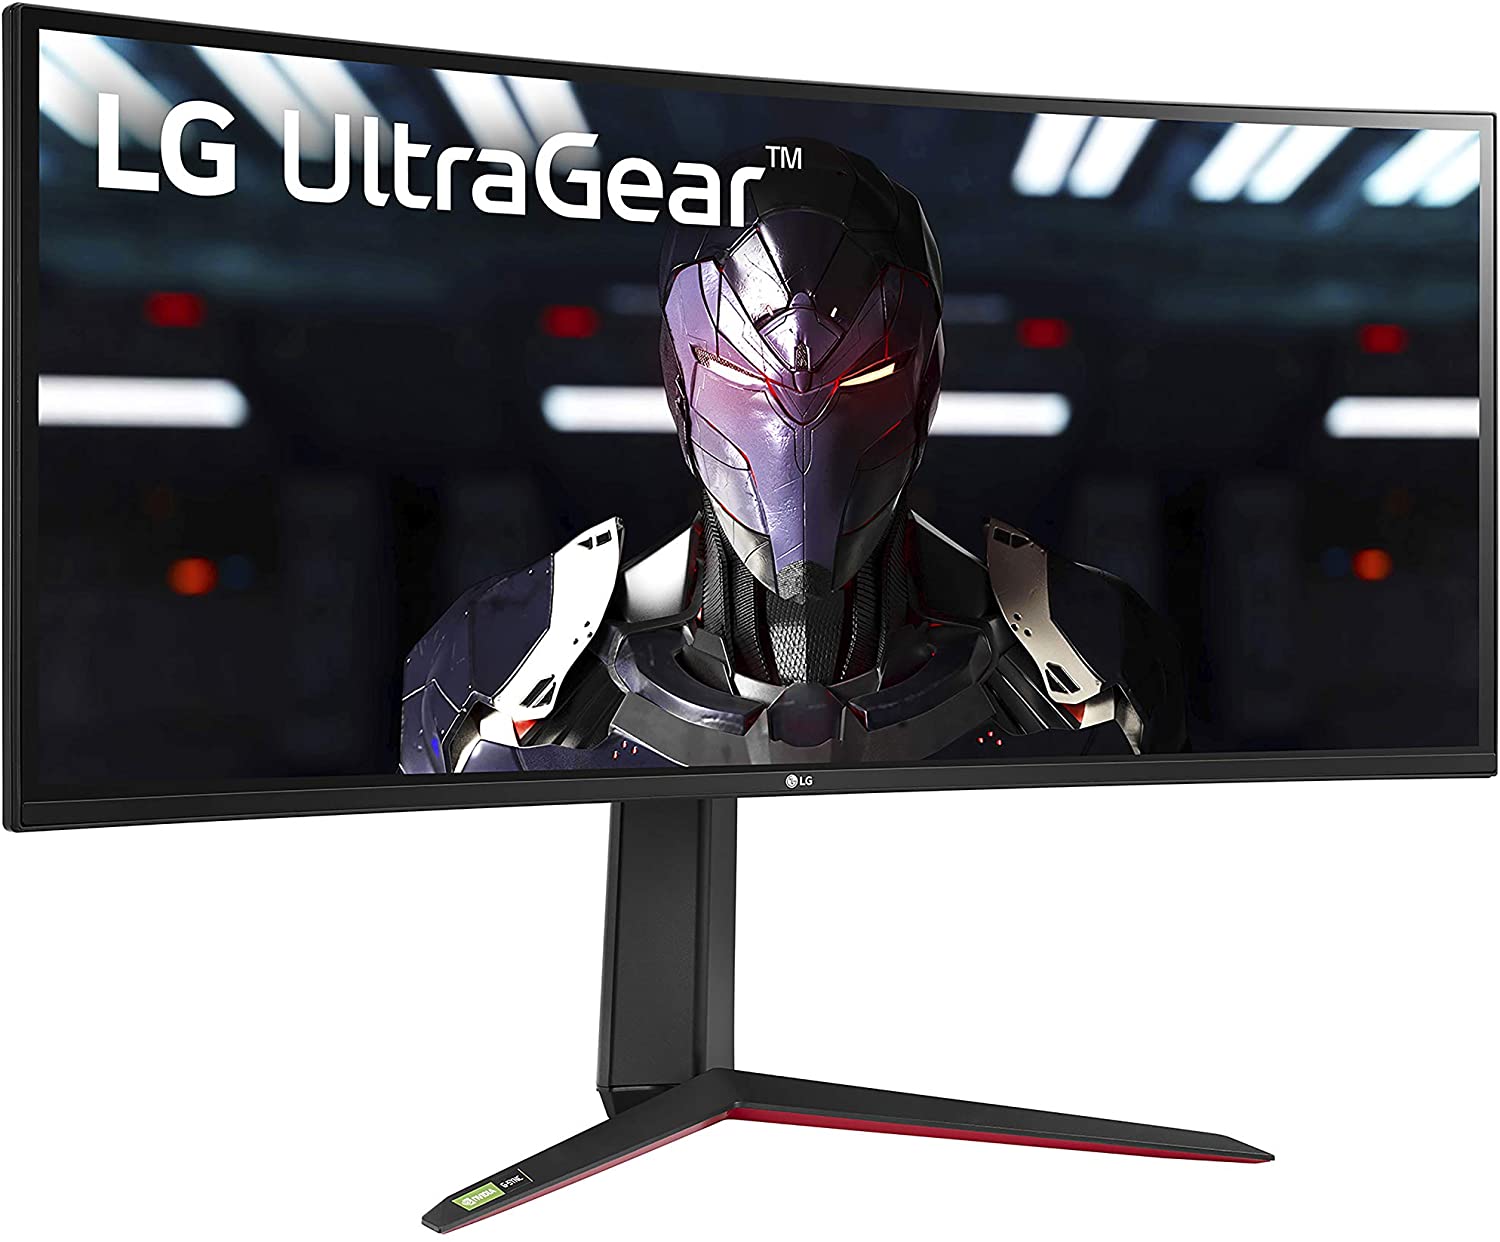 LG 34GP83A-B 34 Inch 21: 9 Ultragear Curved QHD (3440 x 1440) 1ms Nano IPS Gaming Monitor with 144Hz and G-SYNC Compatibility $677